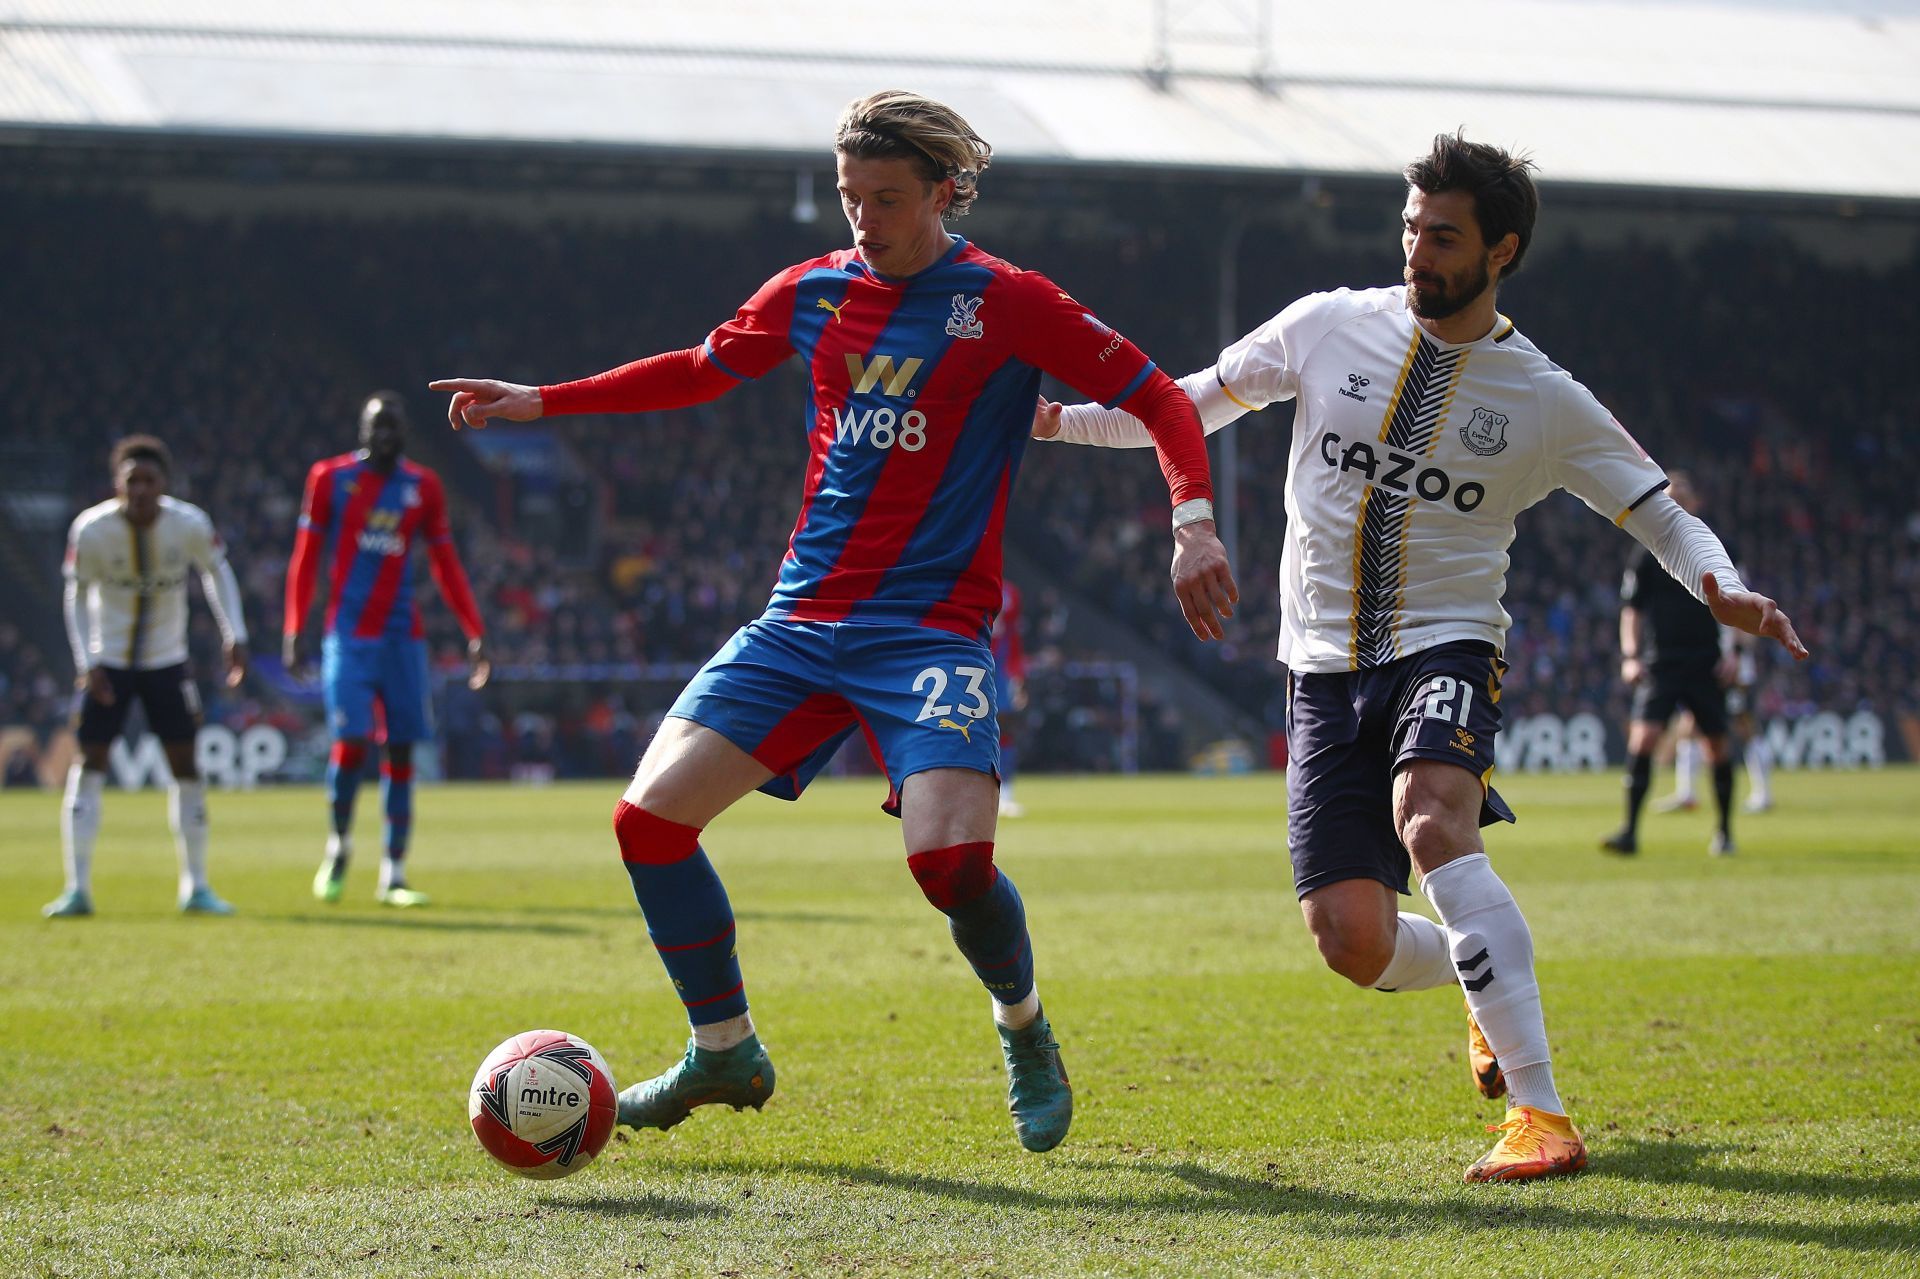 Crystal Palace v Everton: The Emirates FA Cup Quarter Final